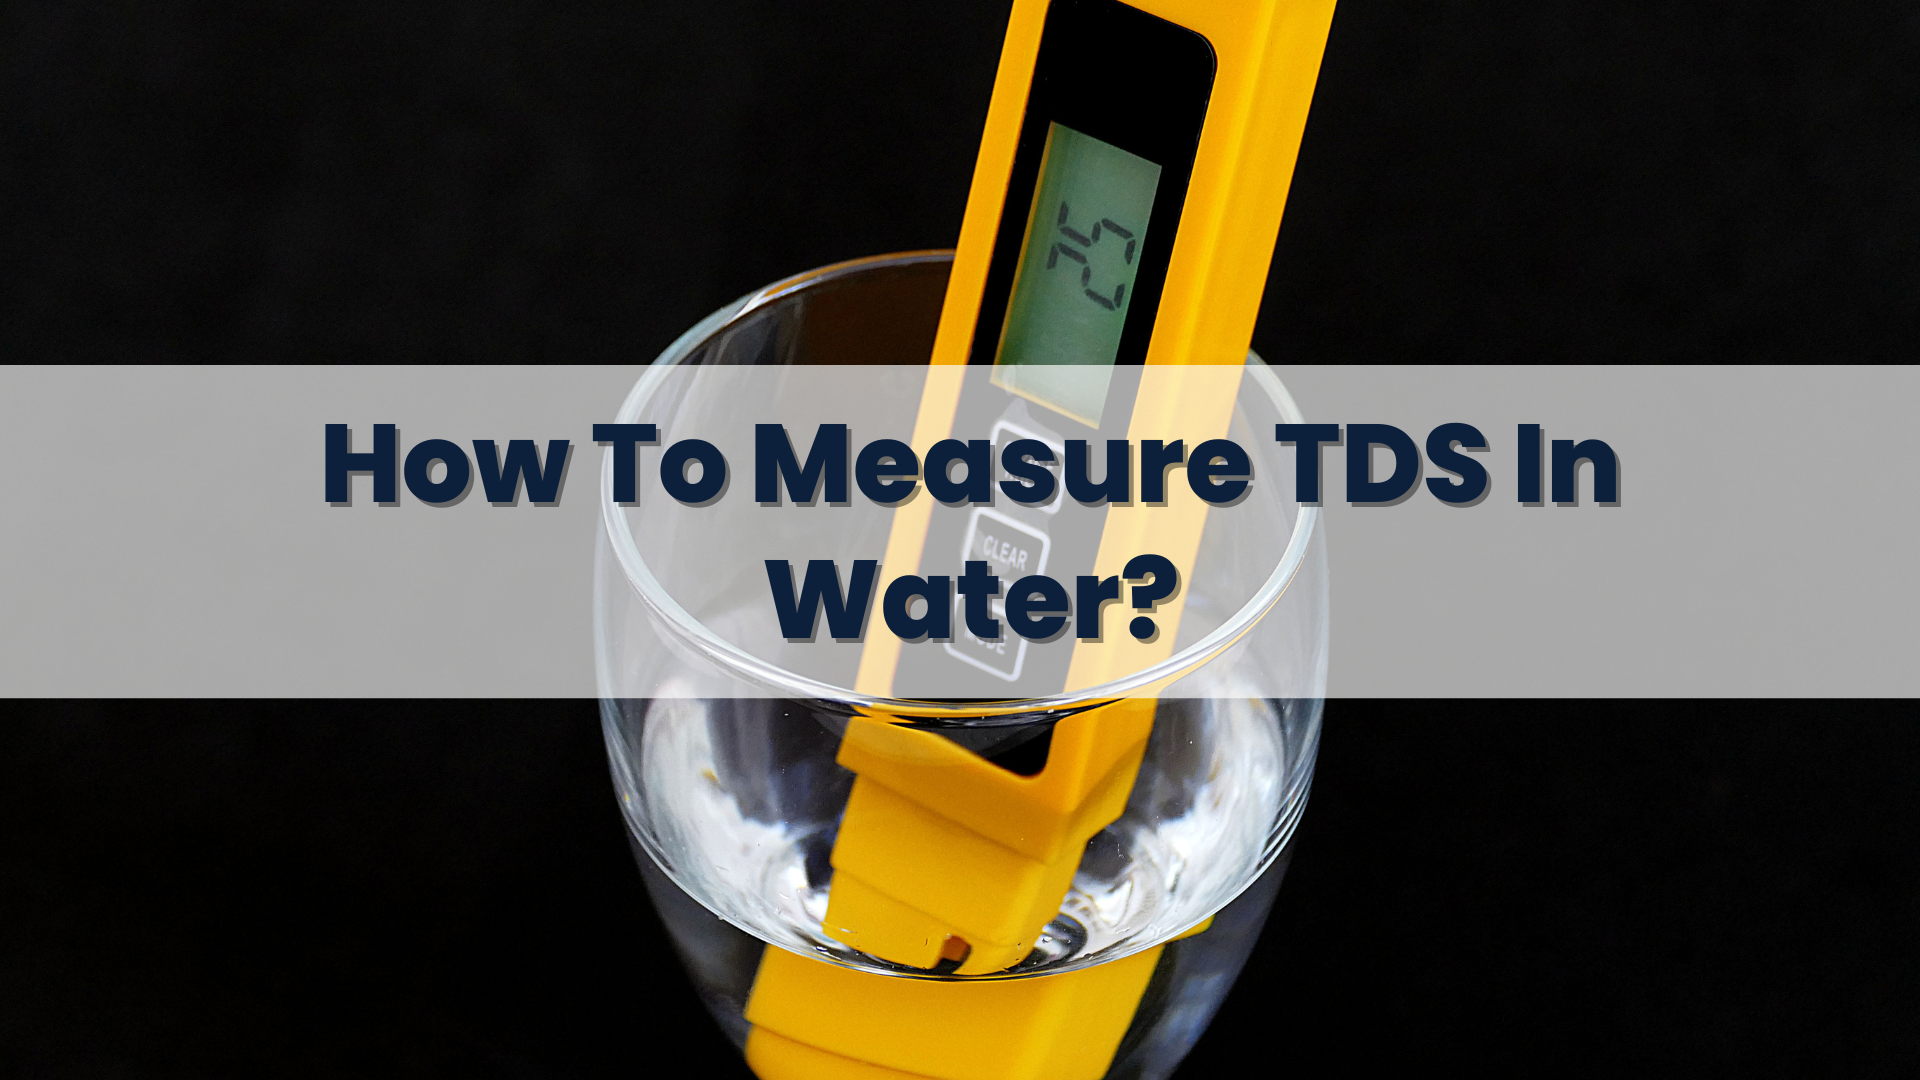 How To Measure TDS In Water